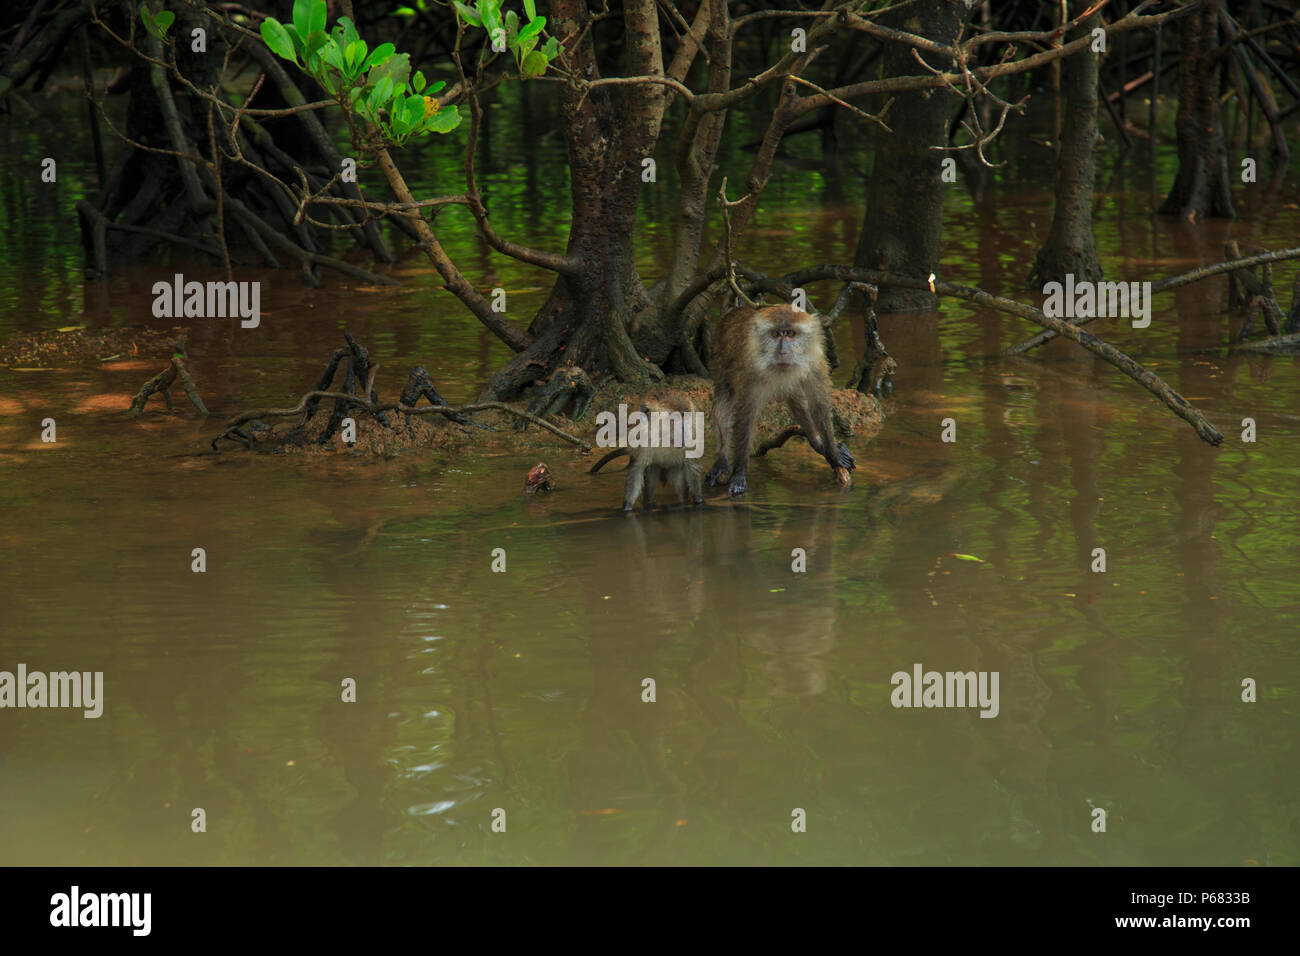 Macaques in the Mangrove - photographed during the Langkawi Mangrove Tour Stock Photo